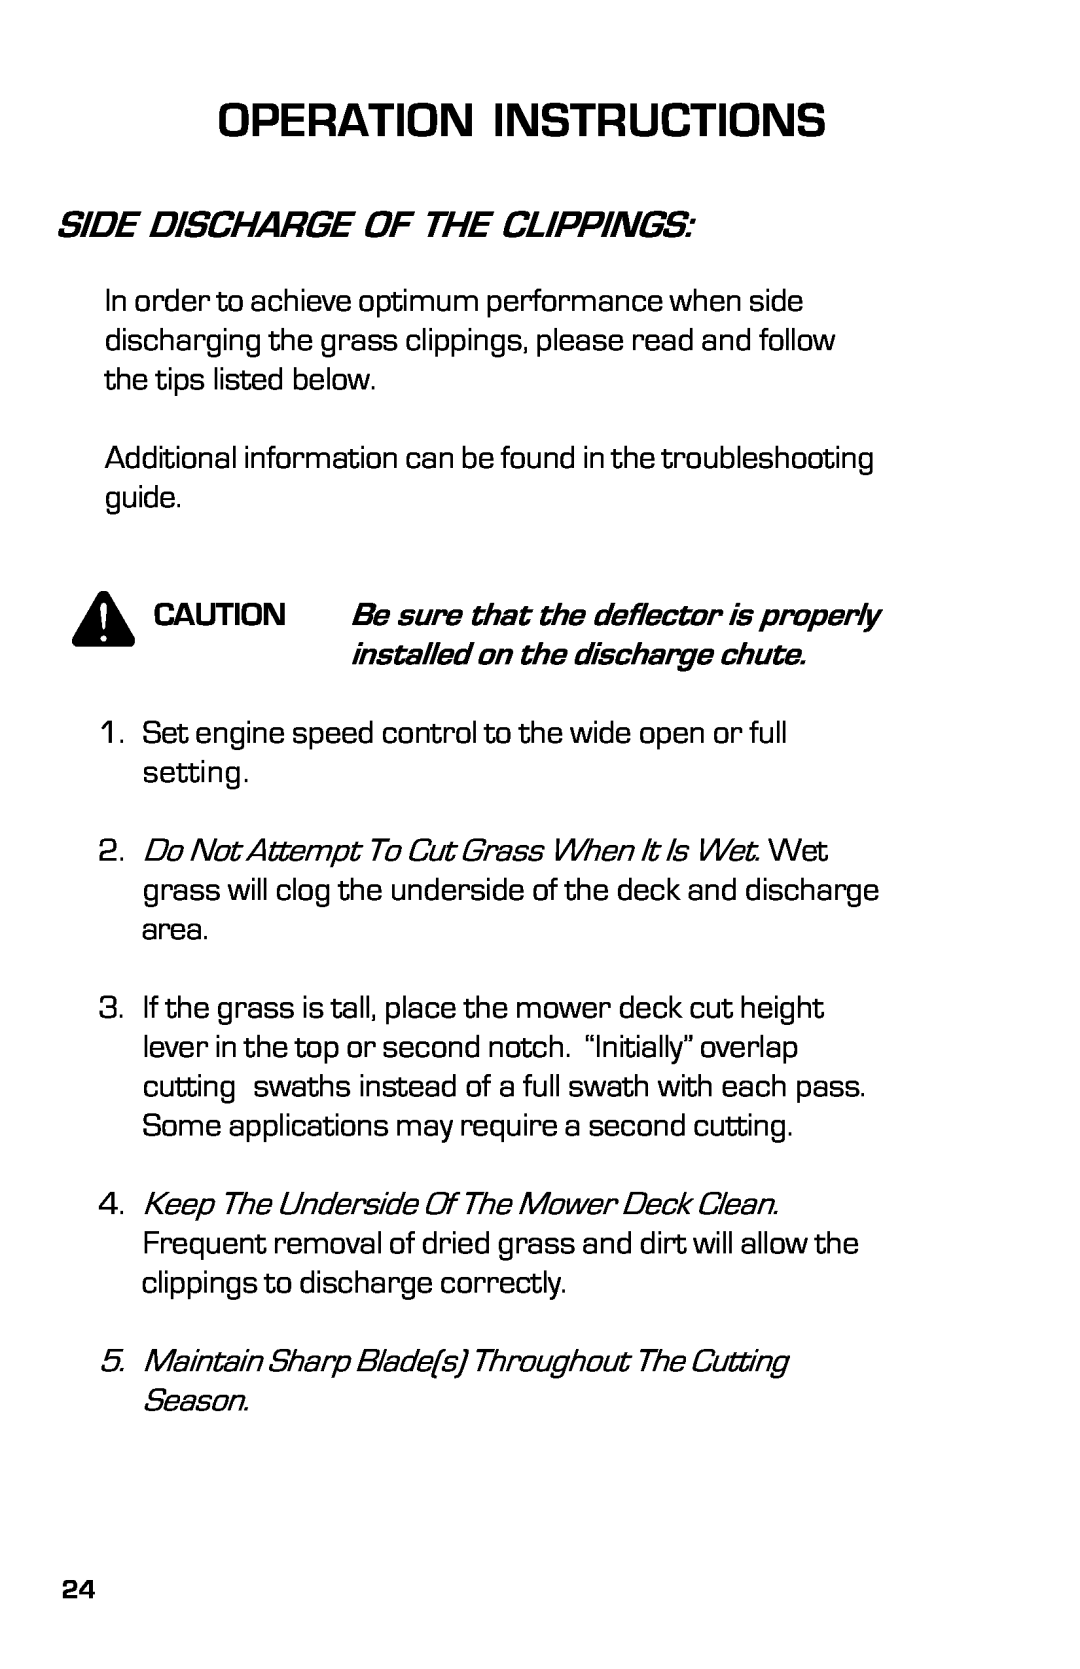 Dixon 2004 manual Side Discharge Of The Clippings, Operation Instructions 